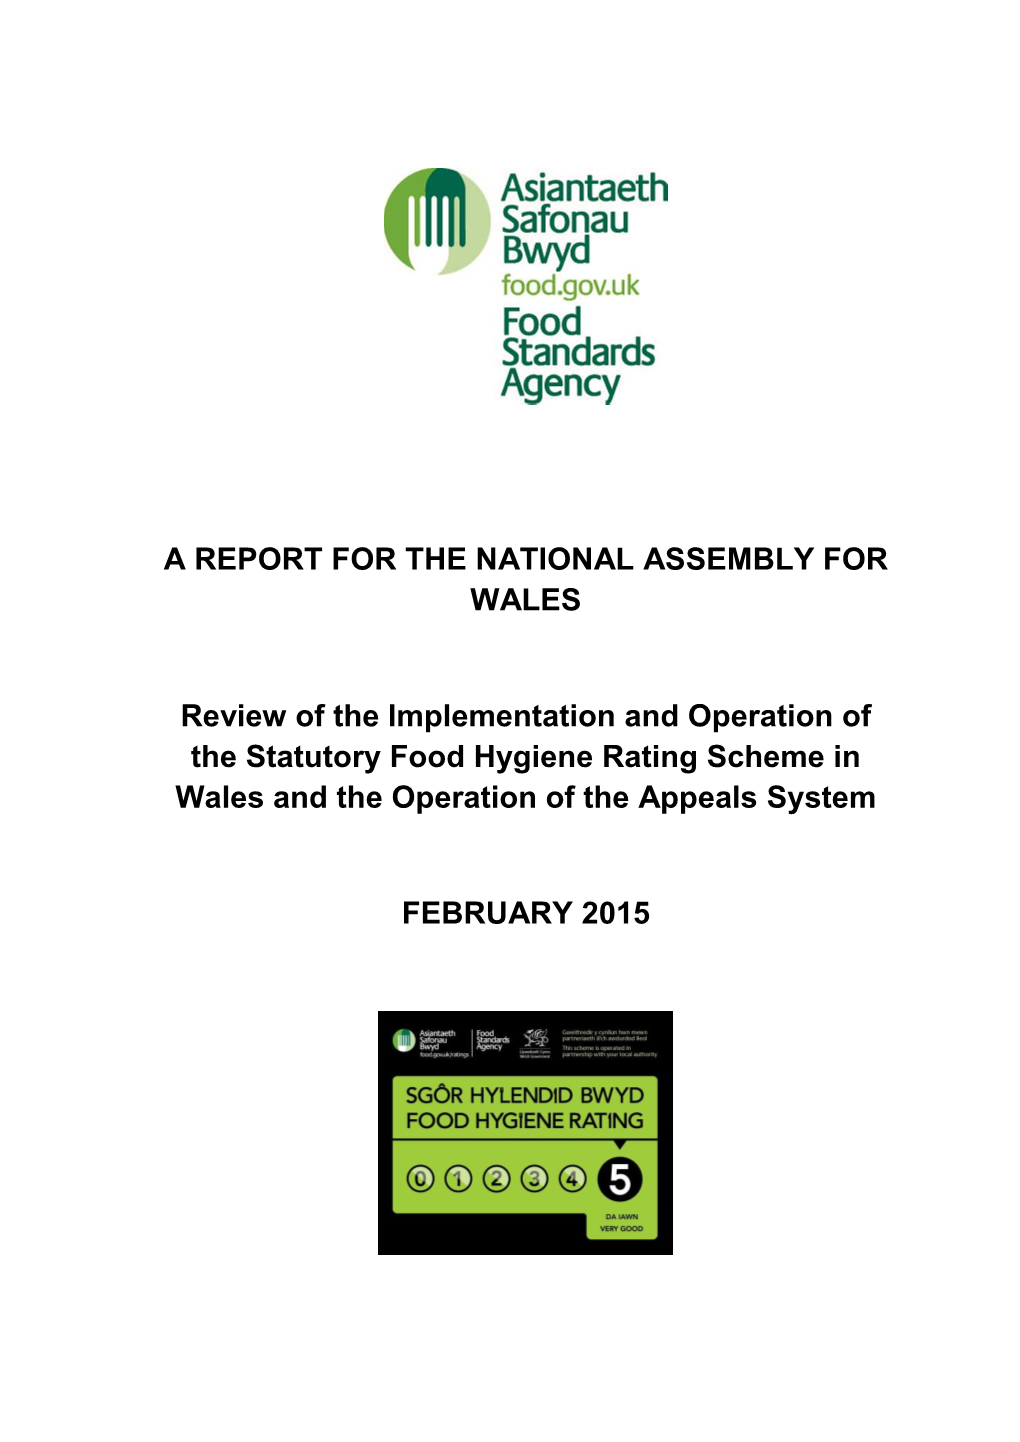 Review of the Implementation and Operation of the Statutory Food Hygiene Rating Scheme in Wales and the Operation of the Appeals System